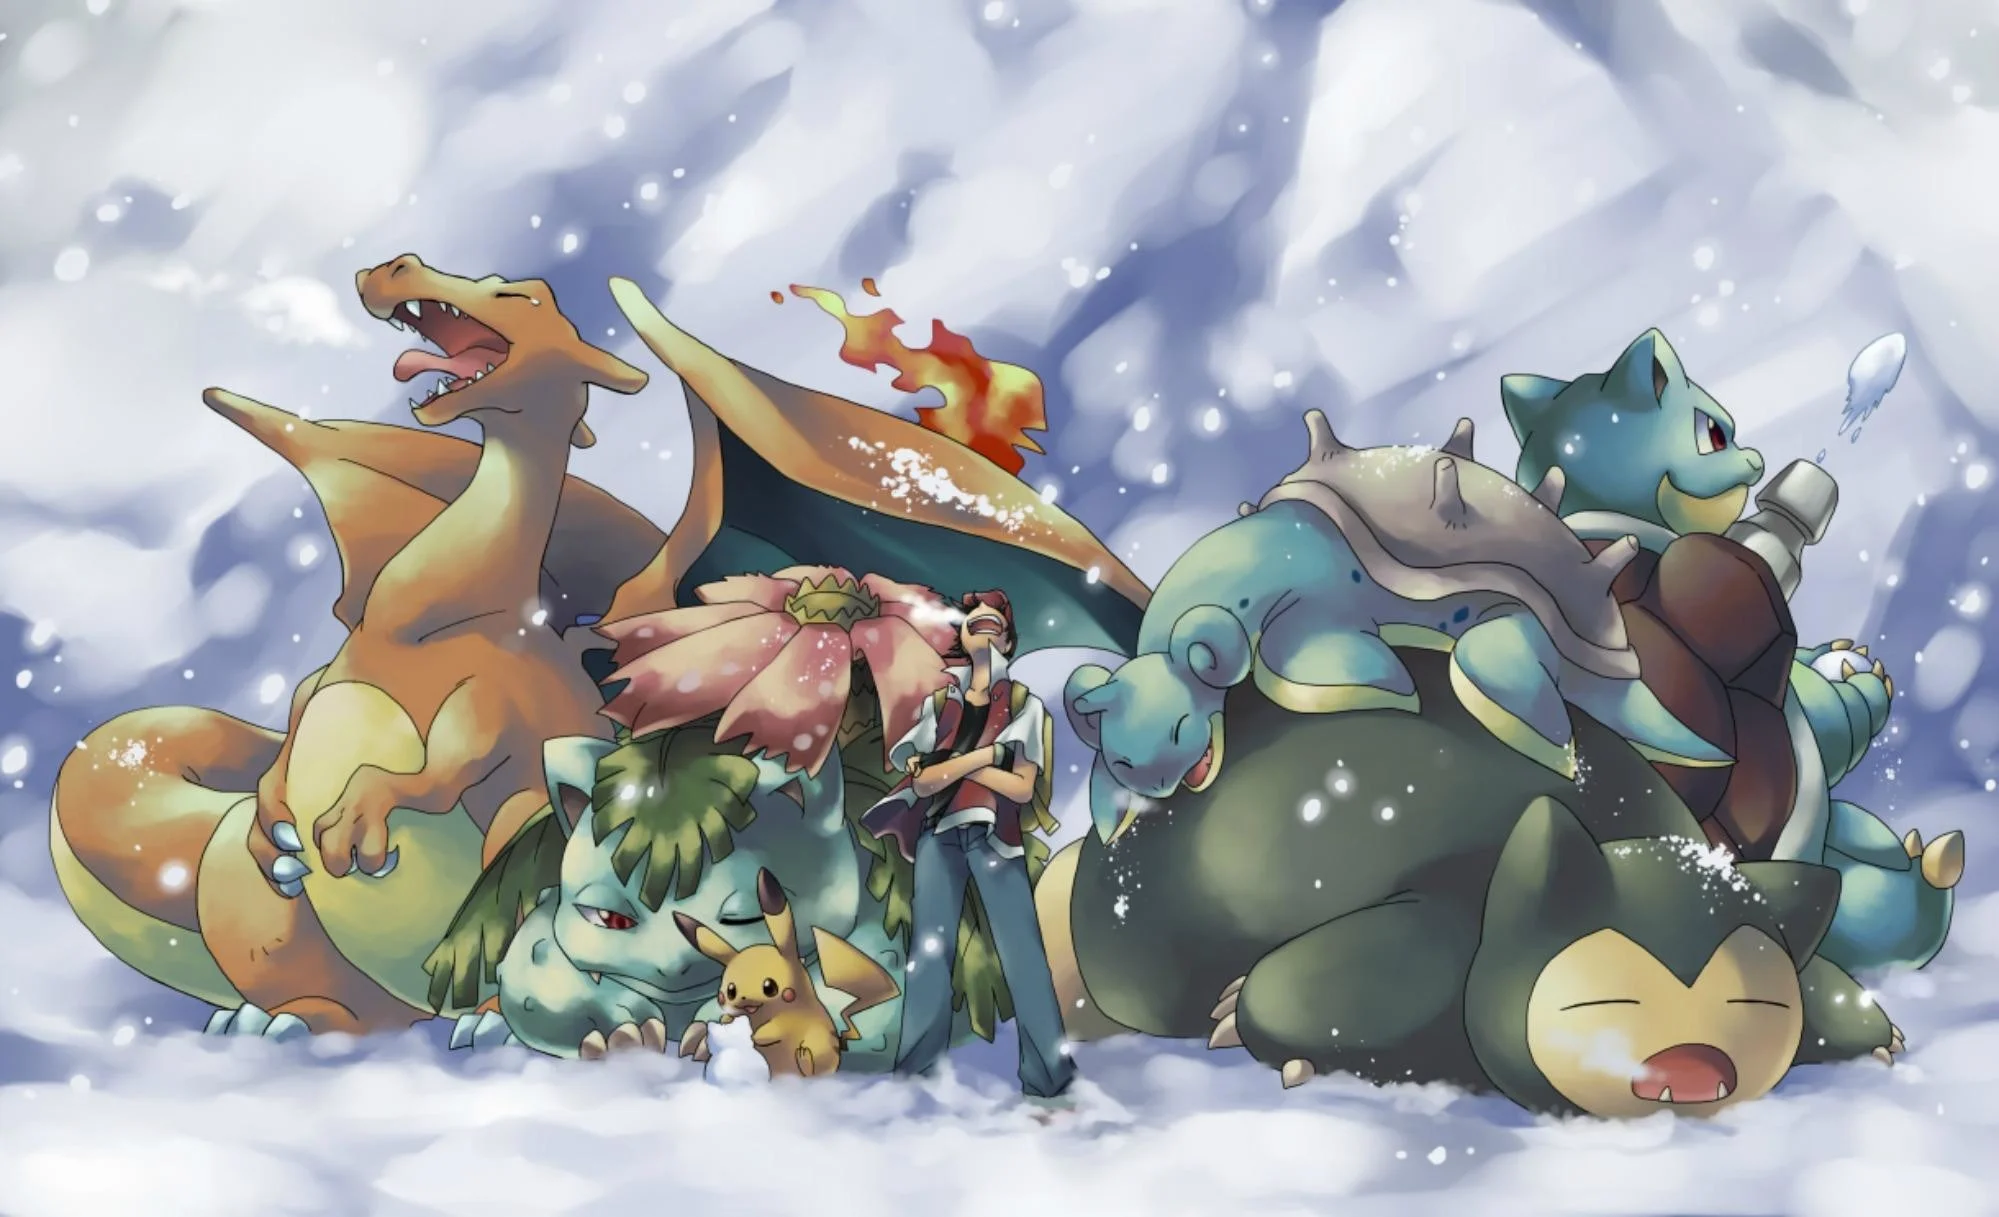 Pokemon starters wallpaper full hd with high resolution wallpaper on anime category similar with all 3d